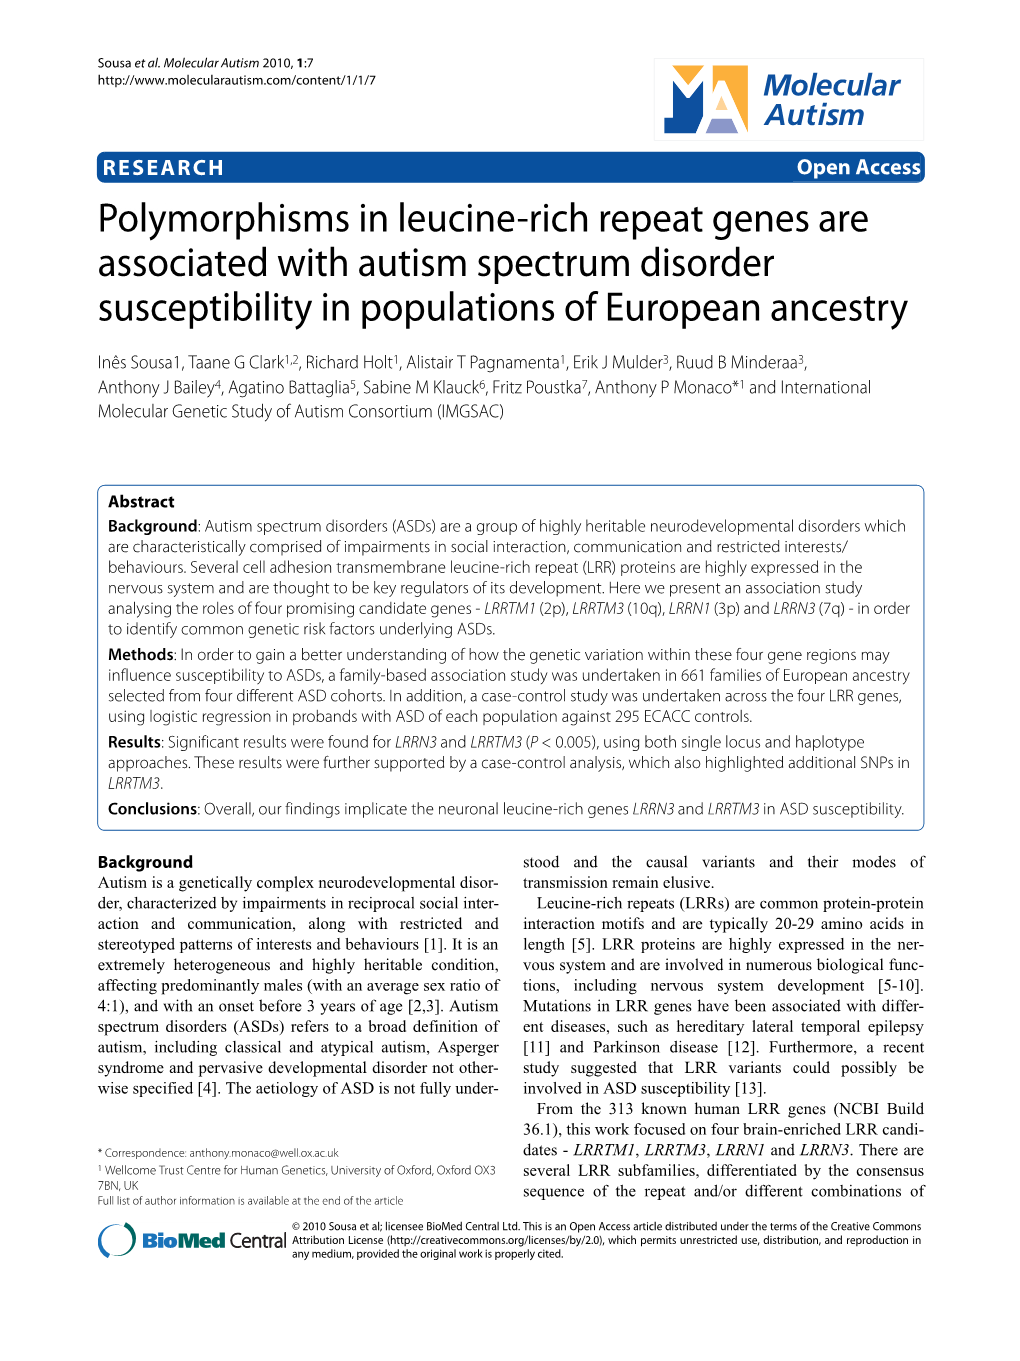 Polymorphisms in Leucine-Rich Repeat Genes Are Associated with Autism